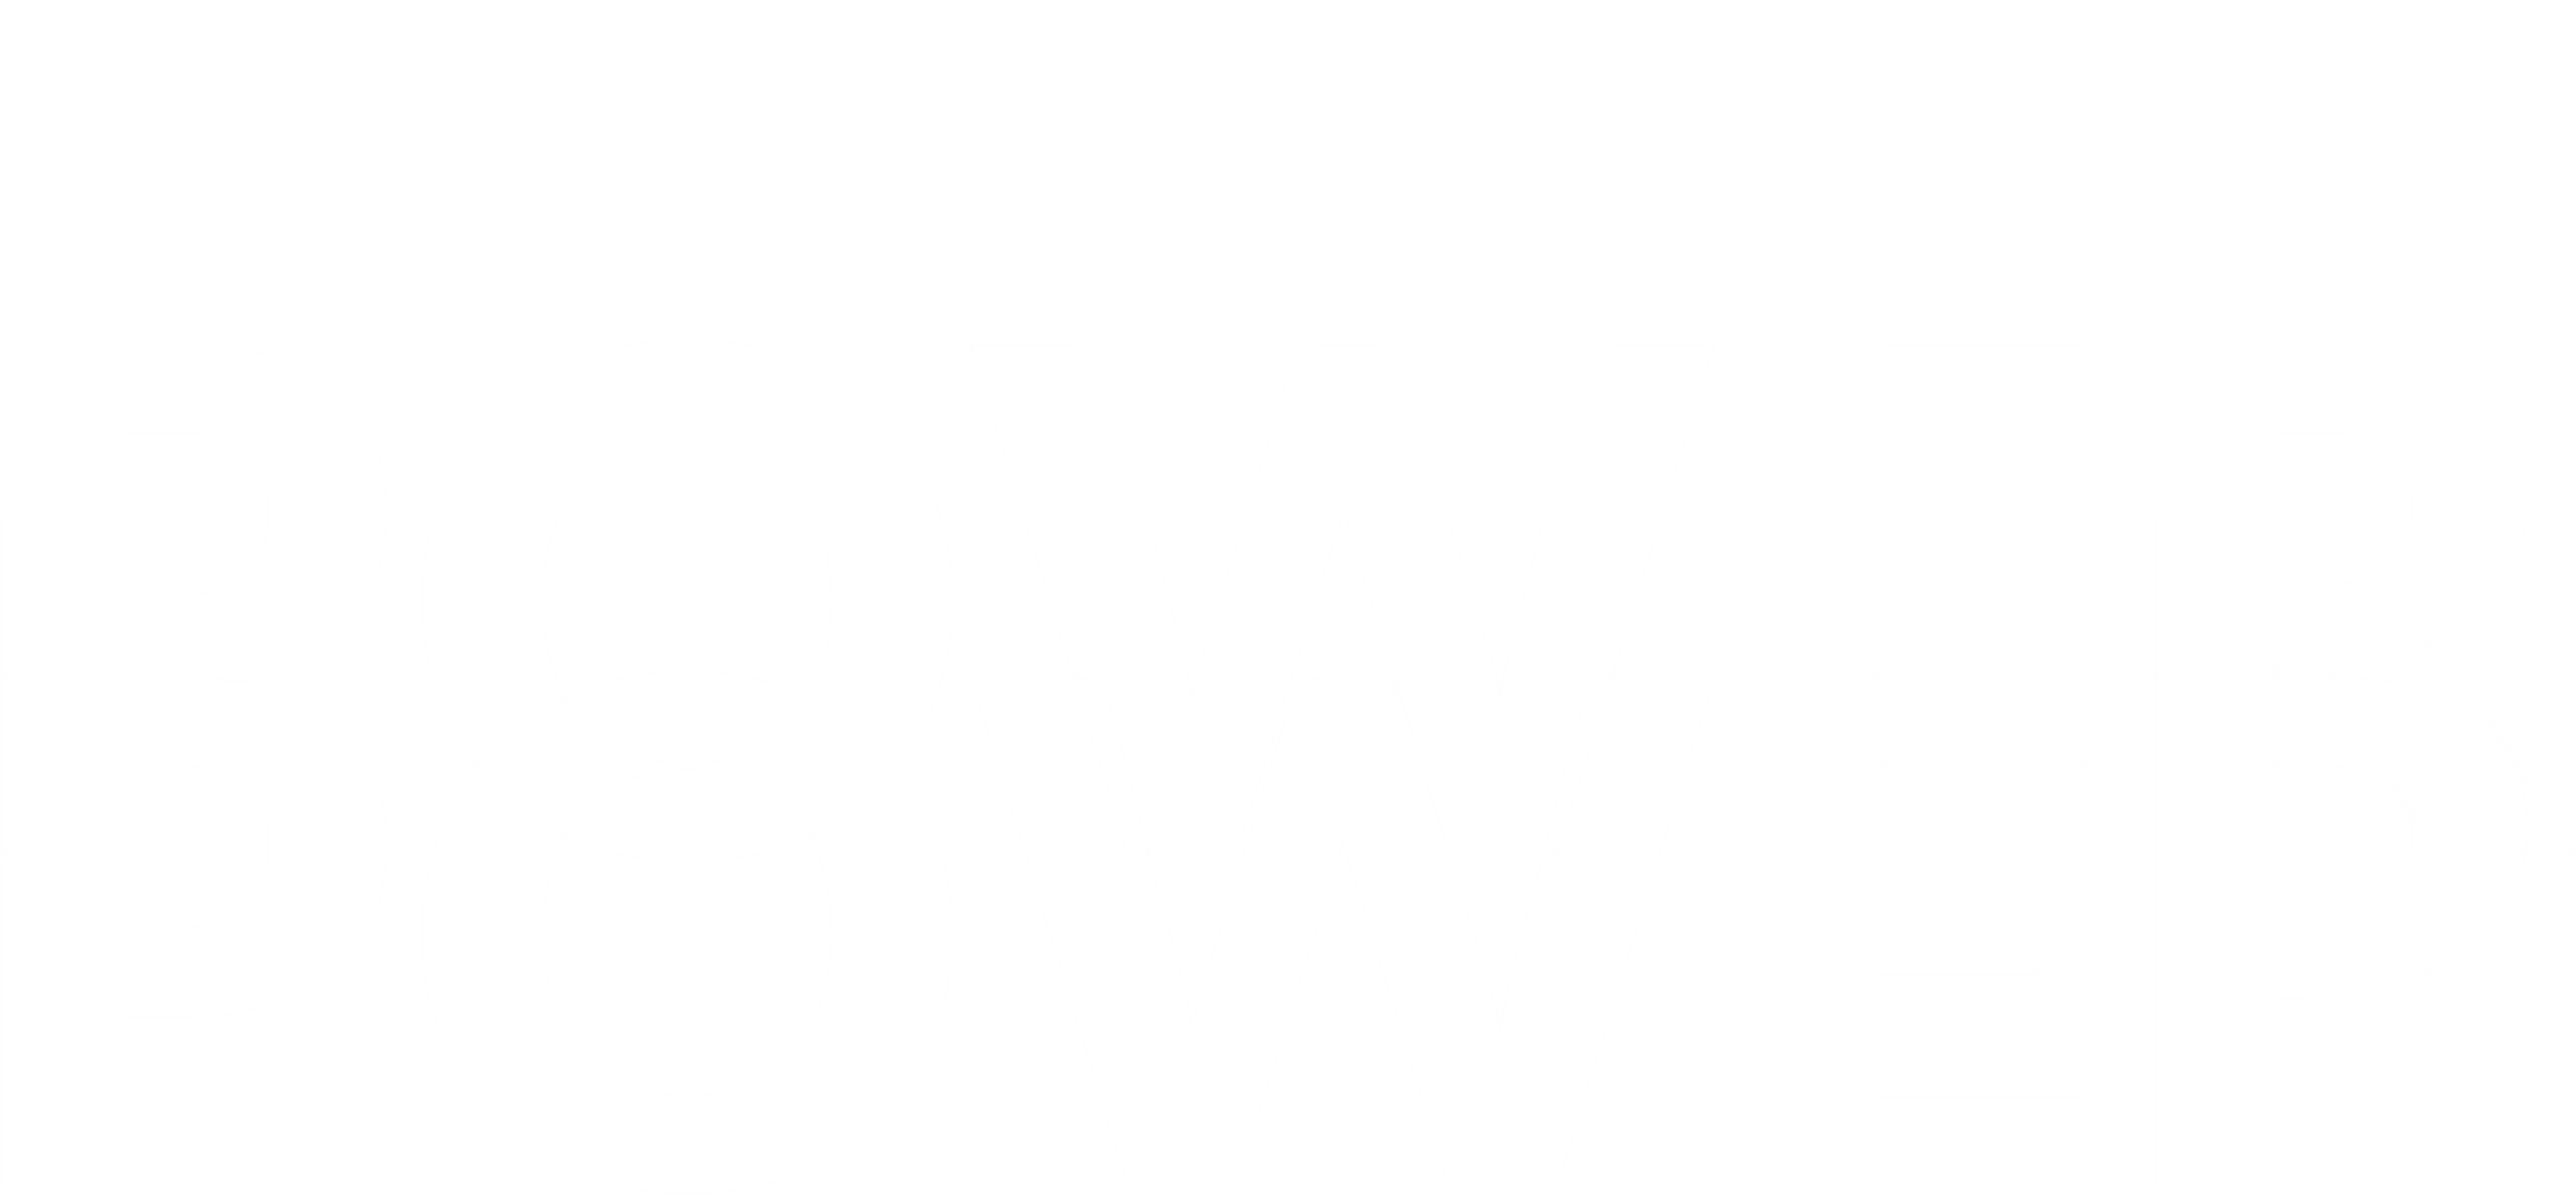 text-image with a bold text showing 'POWER' 